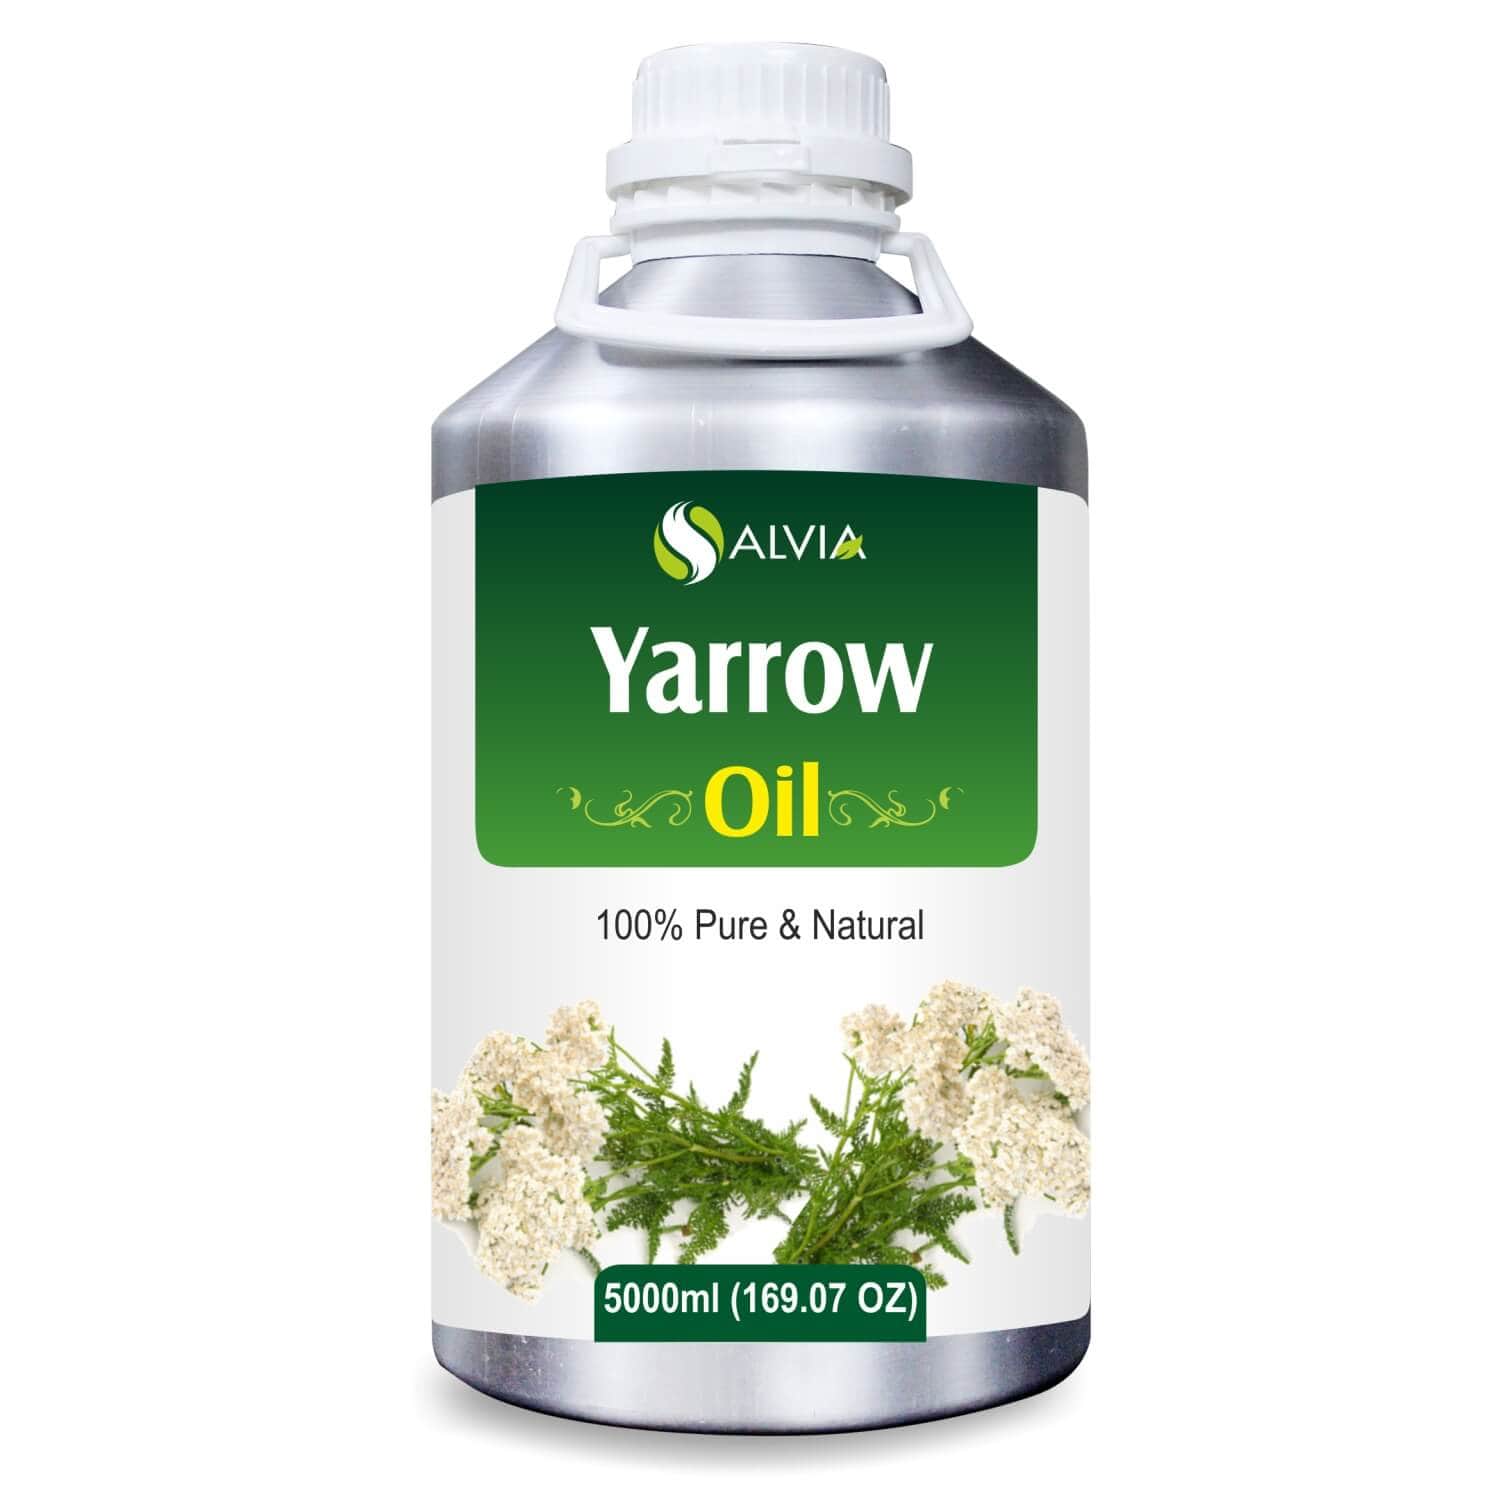 Salvia Natural Essential Oils 5000ml Yarrow Oil (Achillea Millefolium) 100% Natural Essential Oil Diminishes Scars, Astringent, Heals Skin, Pain-Relieving Properties, Expectorant & More